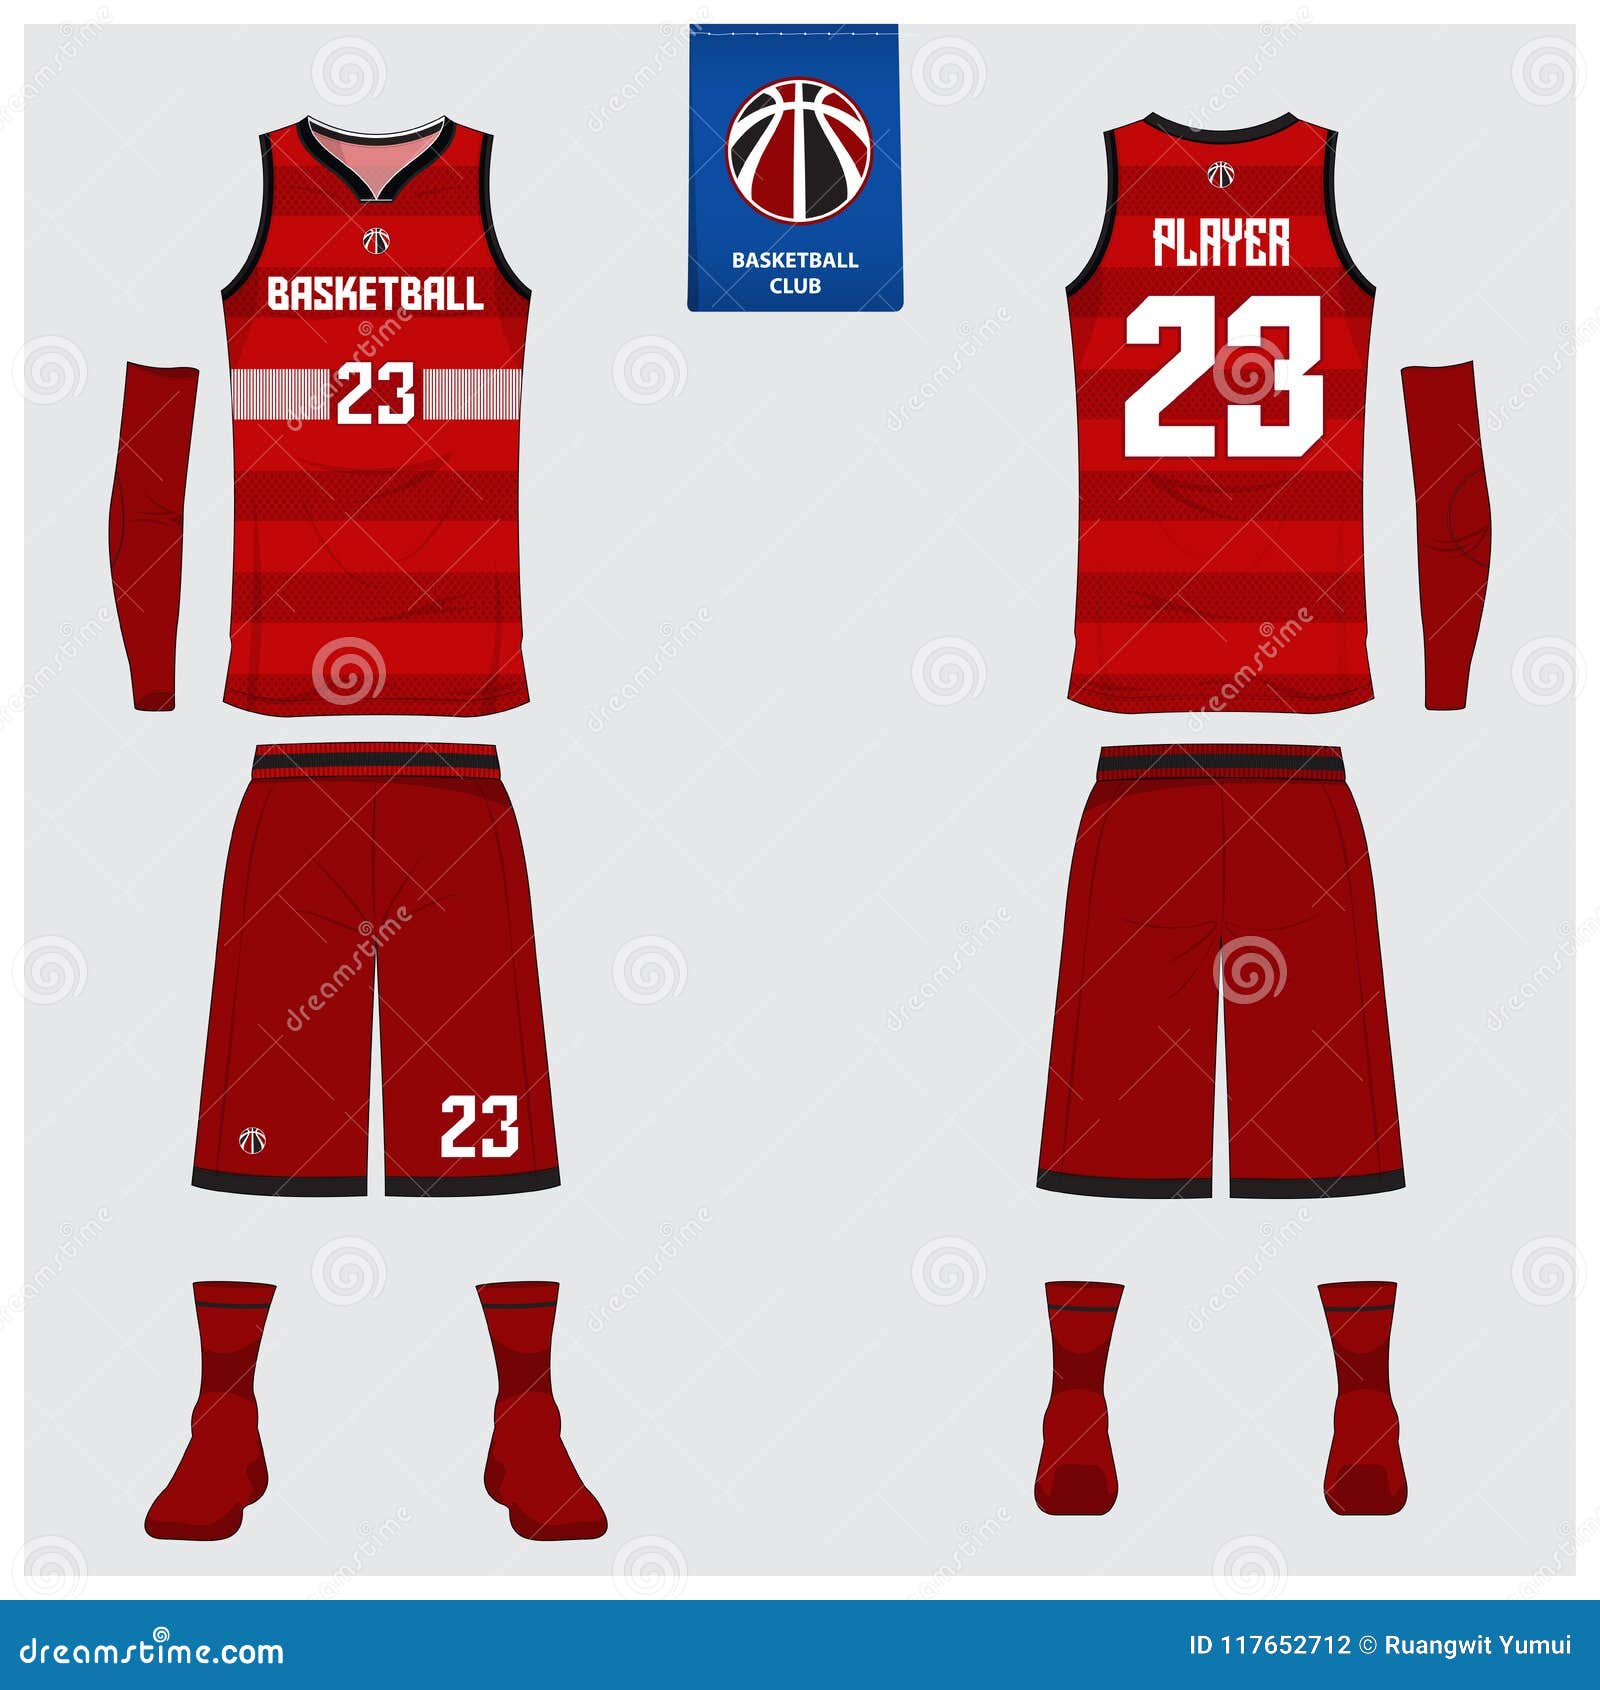 Download Basketball Jersey, Shorts, Socks Template For Basketball ...